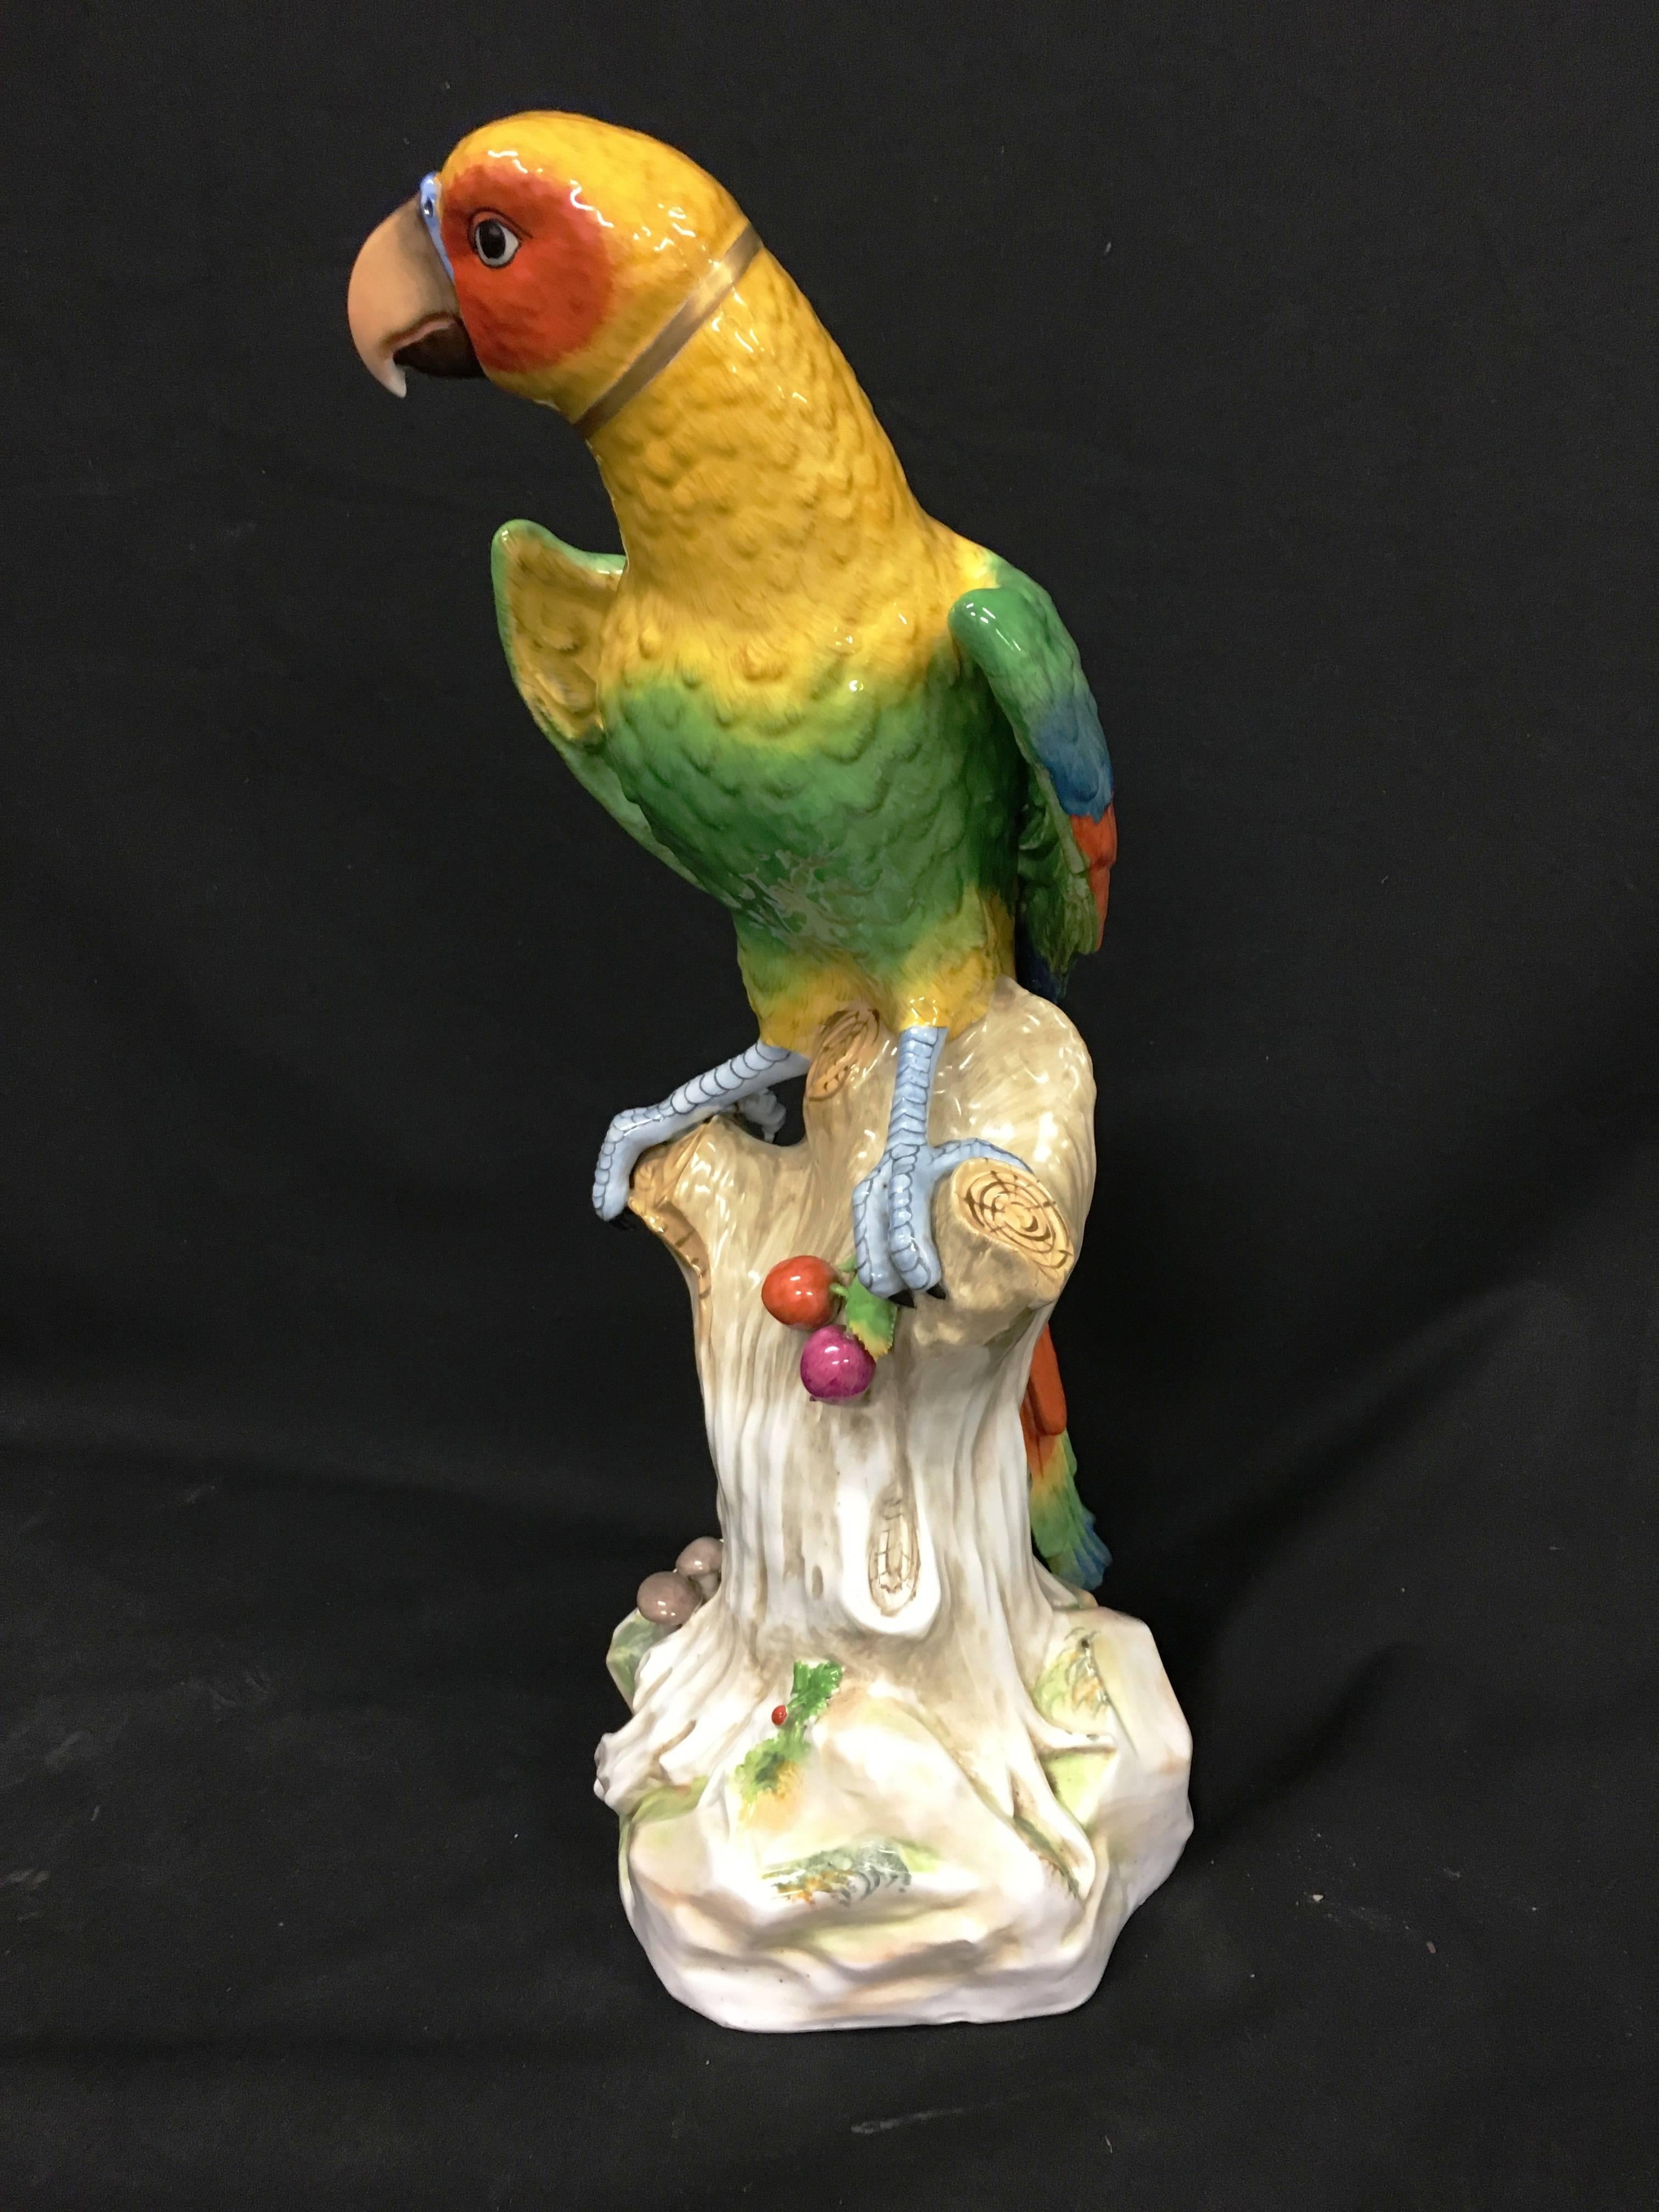 A very impressive 19th century Samson porcelain parrot in the style of Meissen. Having wonderful bold coloring and mounted on a tree stump.